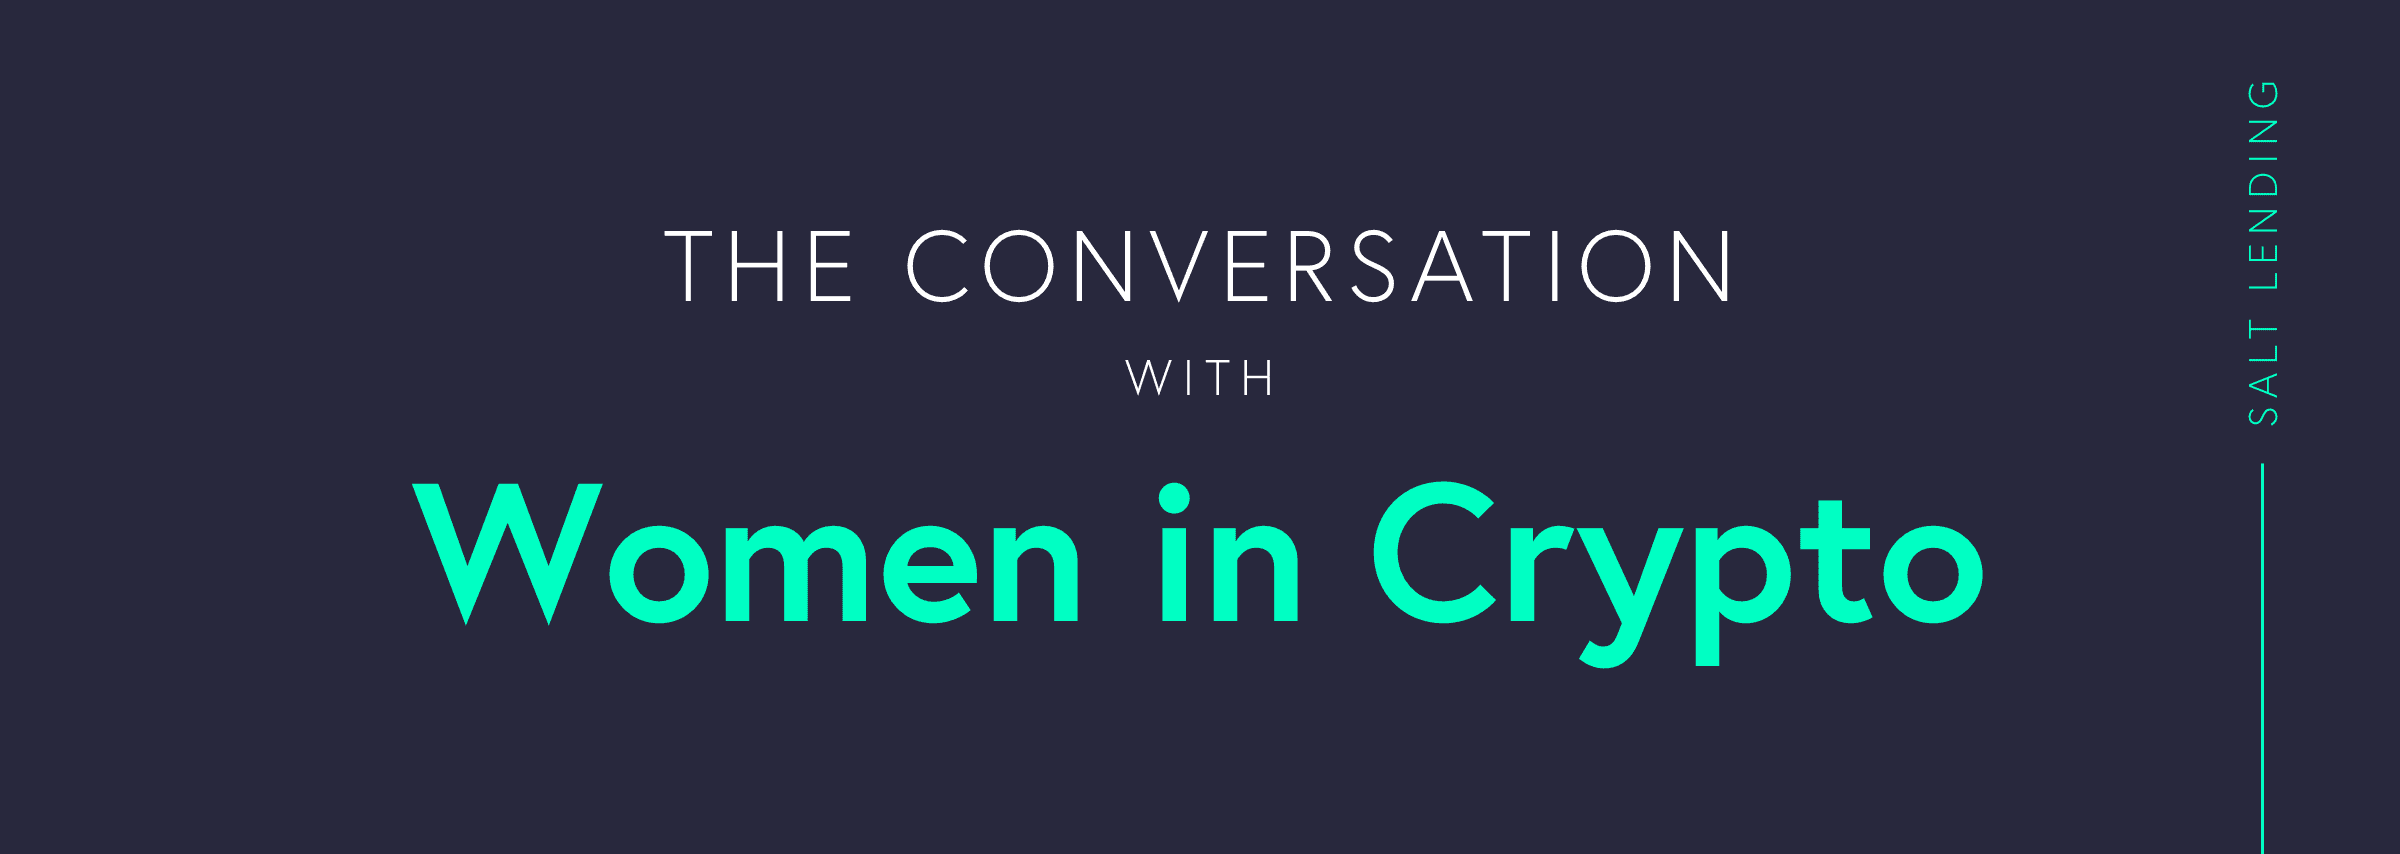 Women in Crypto podcast interviews SALT's Jenny Shaver for The Conversation series